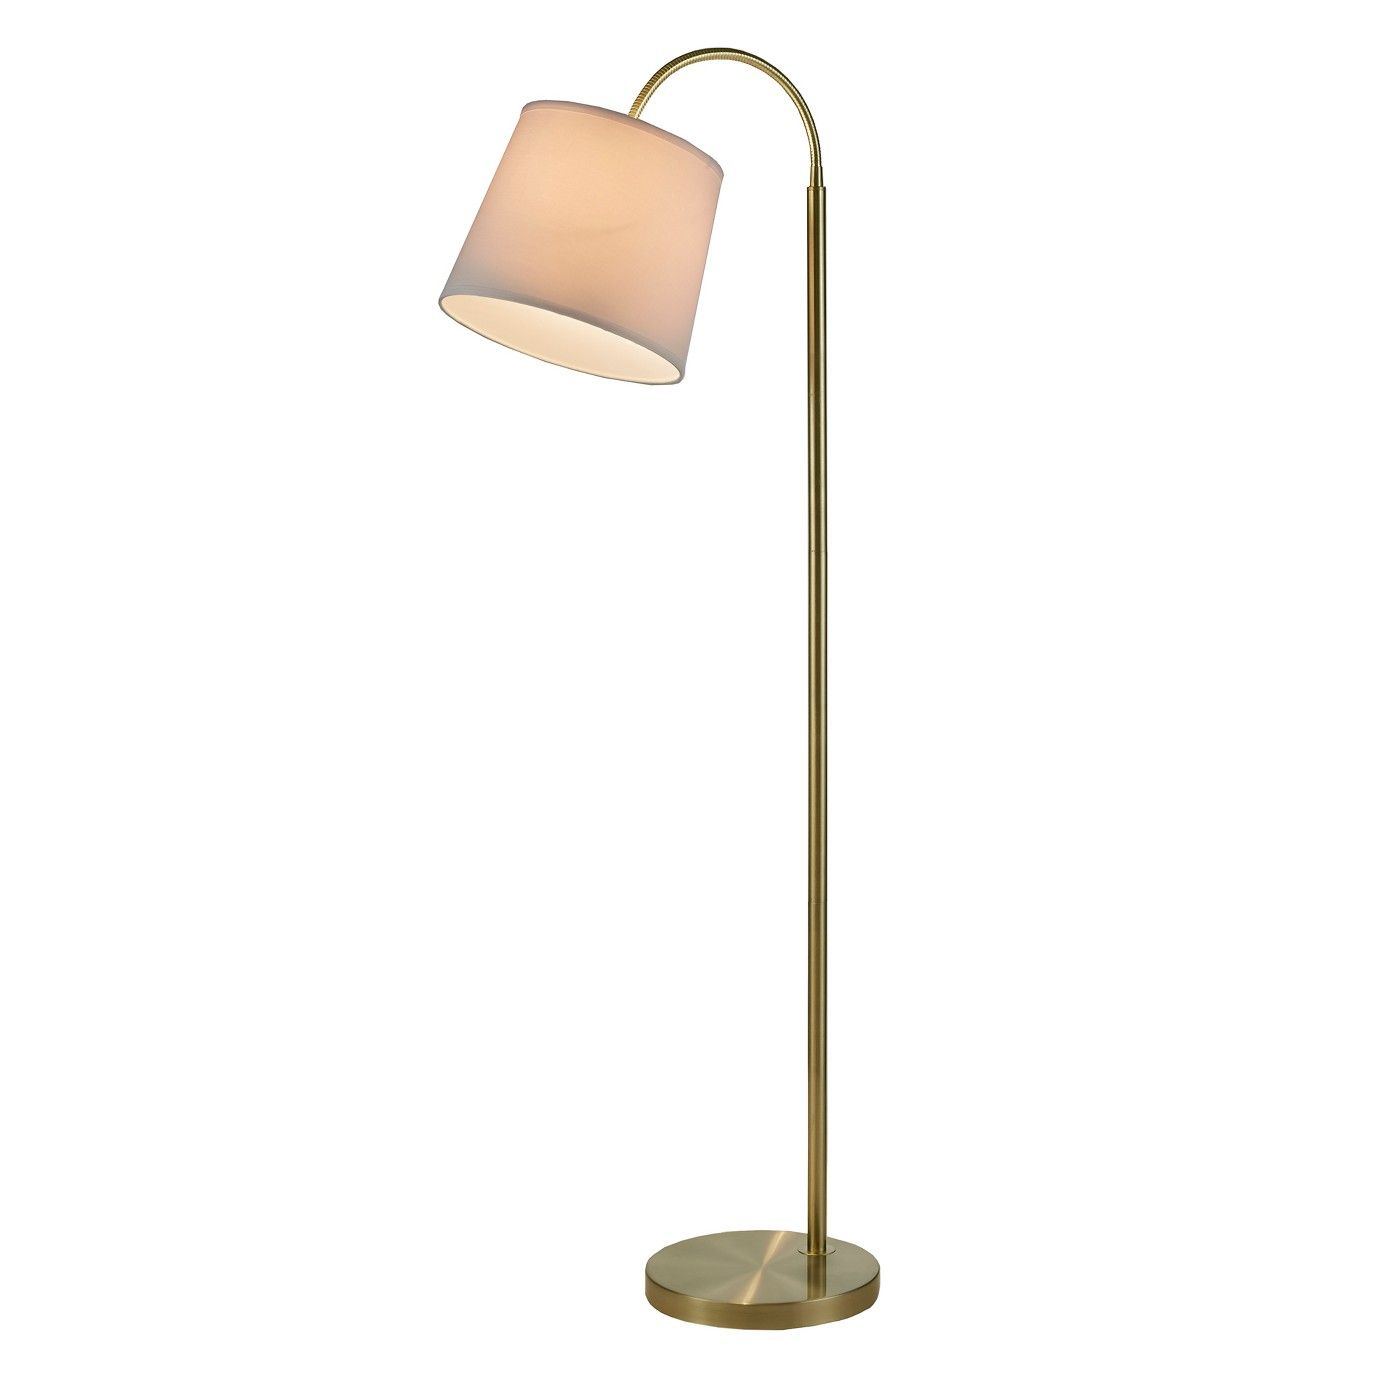 Venus Floor Lamp Whitegold 29 X 64 Lamp Only Target in sizing 1400 X 1400